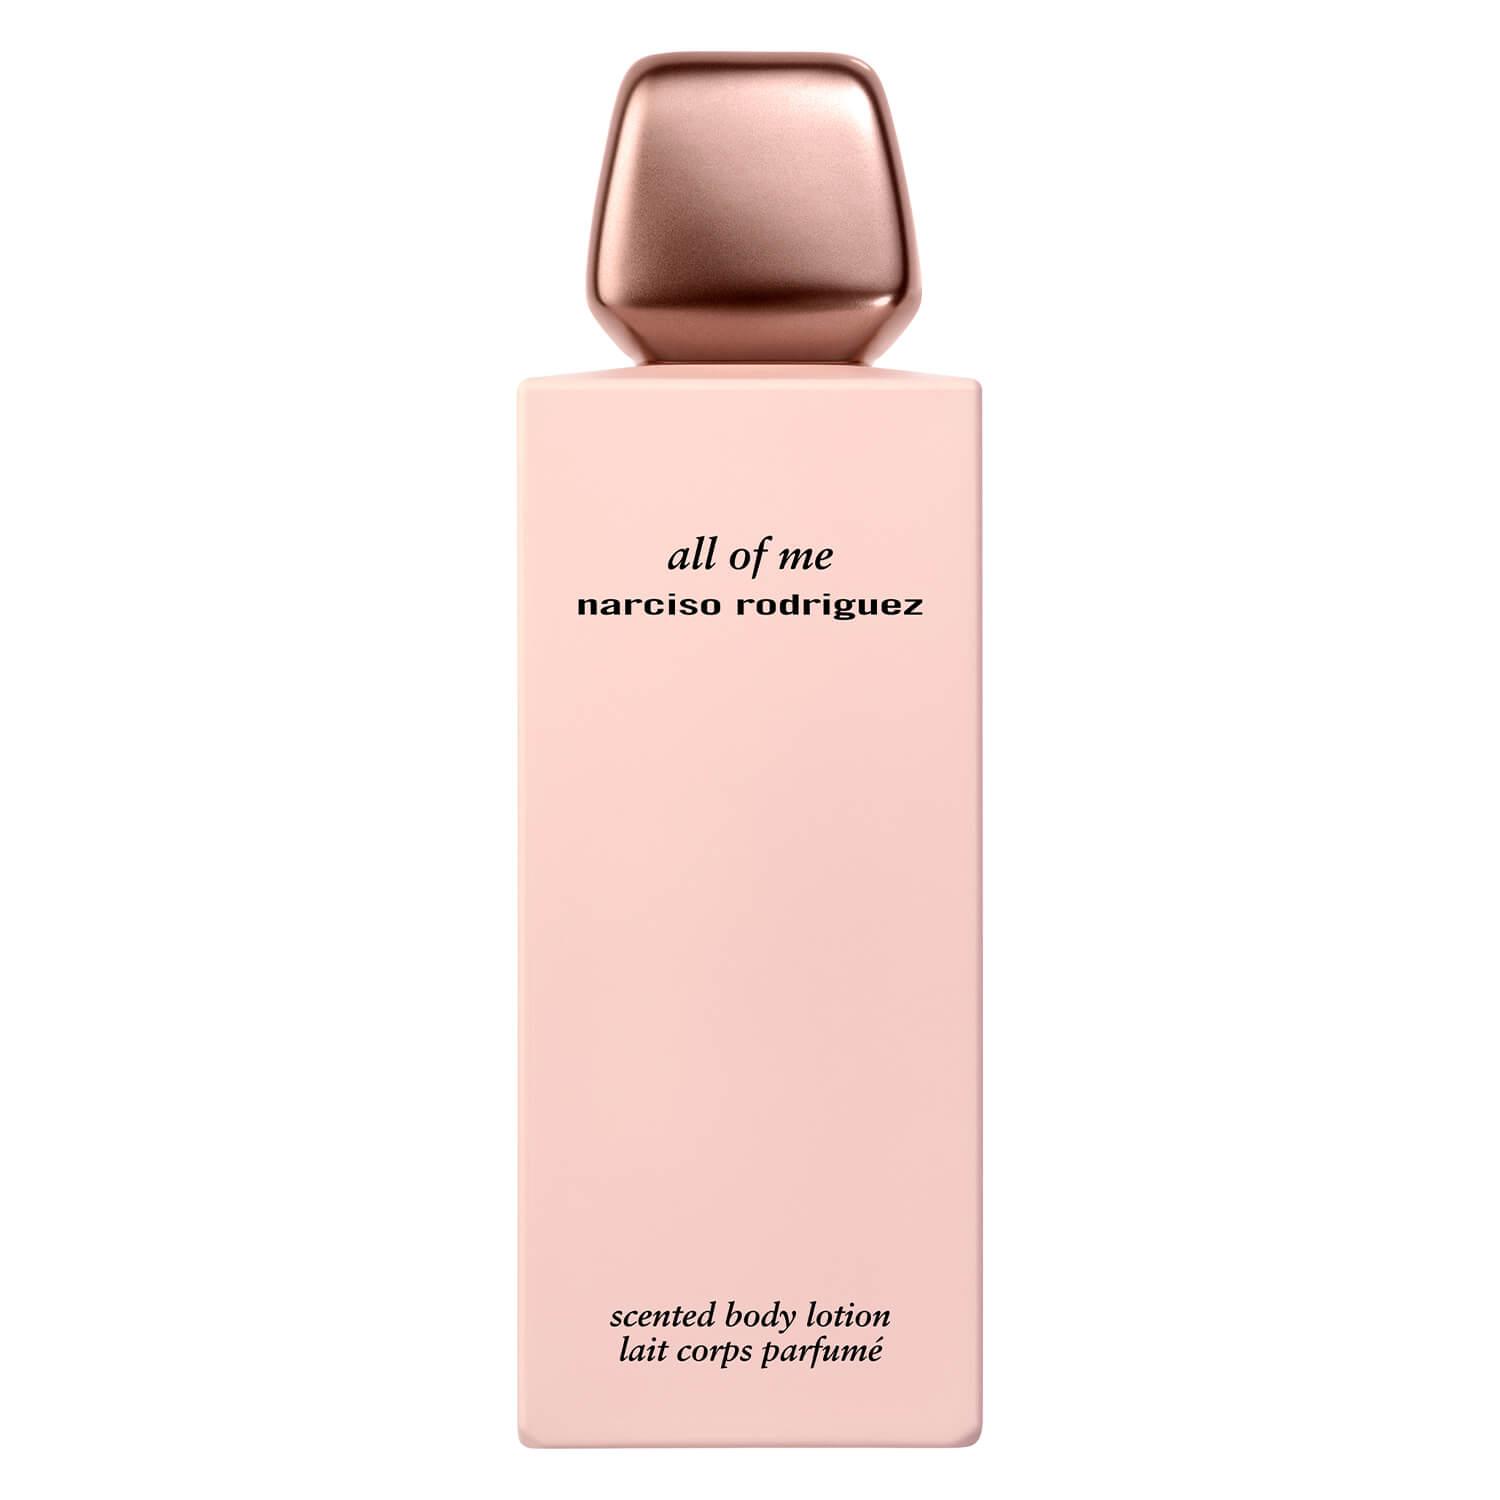 Narciso - All Of Me Body Lotion